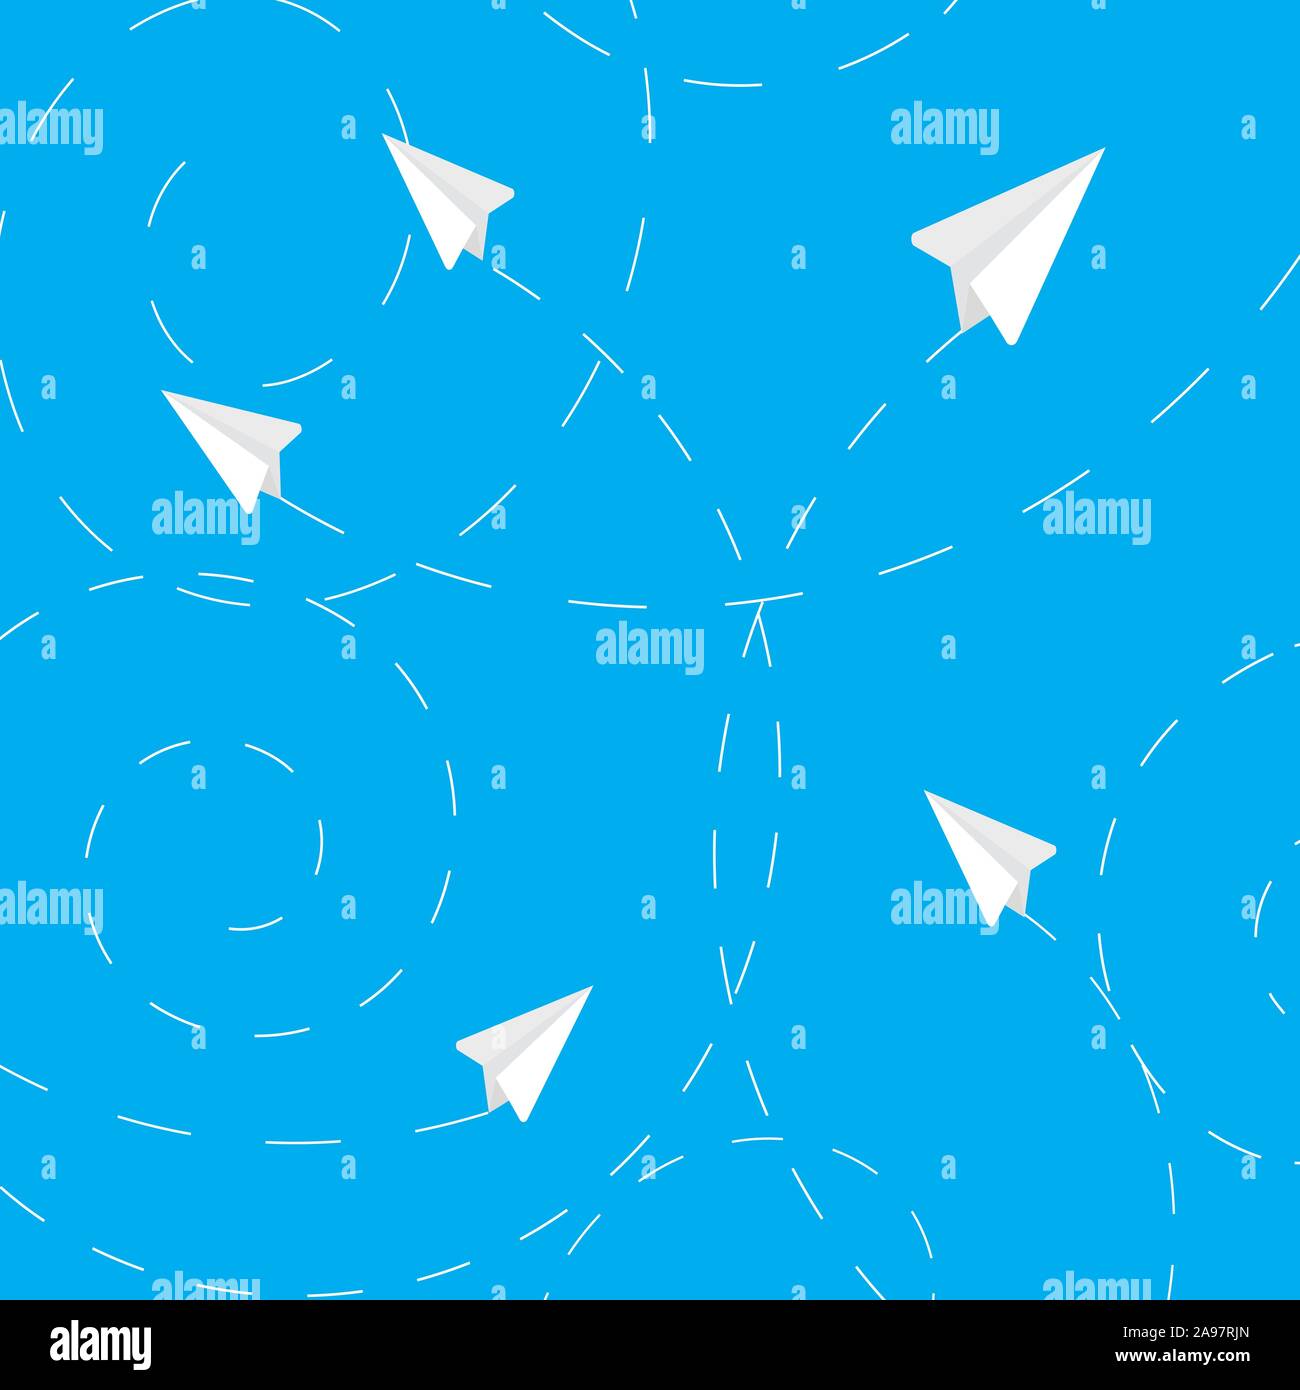 White Paper airplanes flying on blue sky background. Craft design origami style, simply vector graphic illustration for design,icon, logo, background Stock Vector